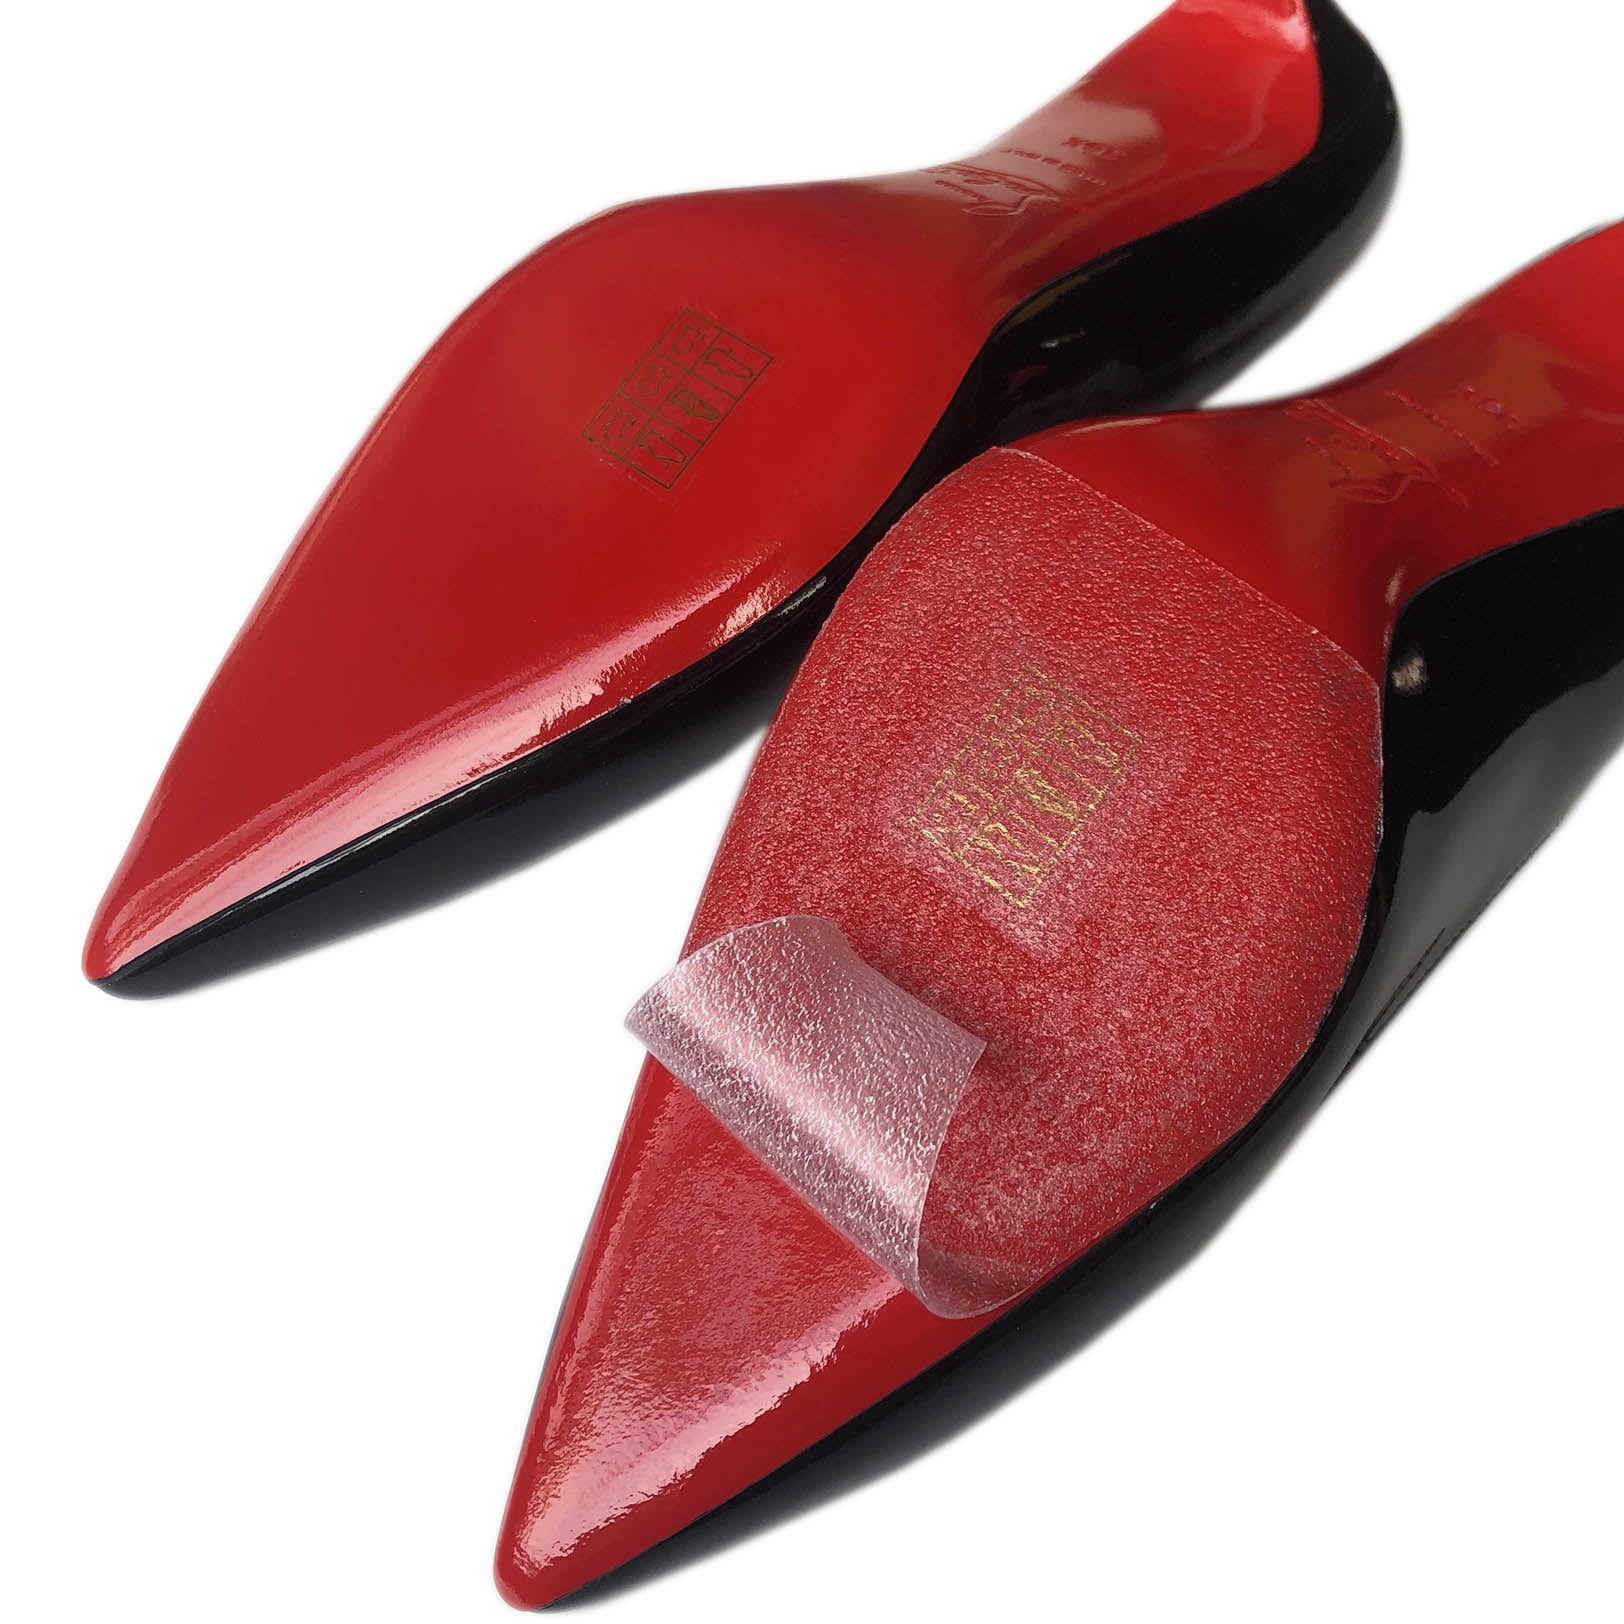 DIY Christian Louboutin Sole Protector Removal - HIGHLY REQUESTED